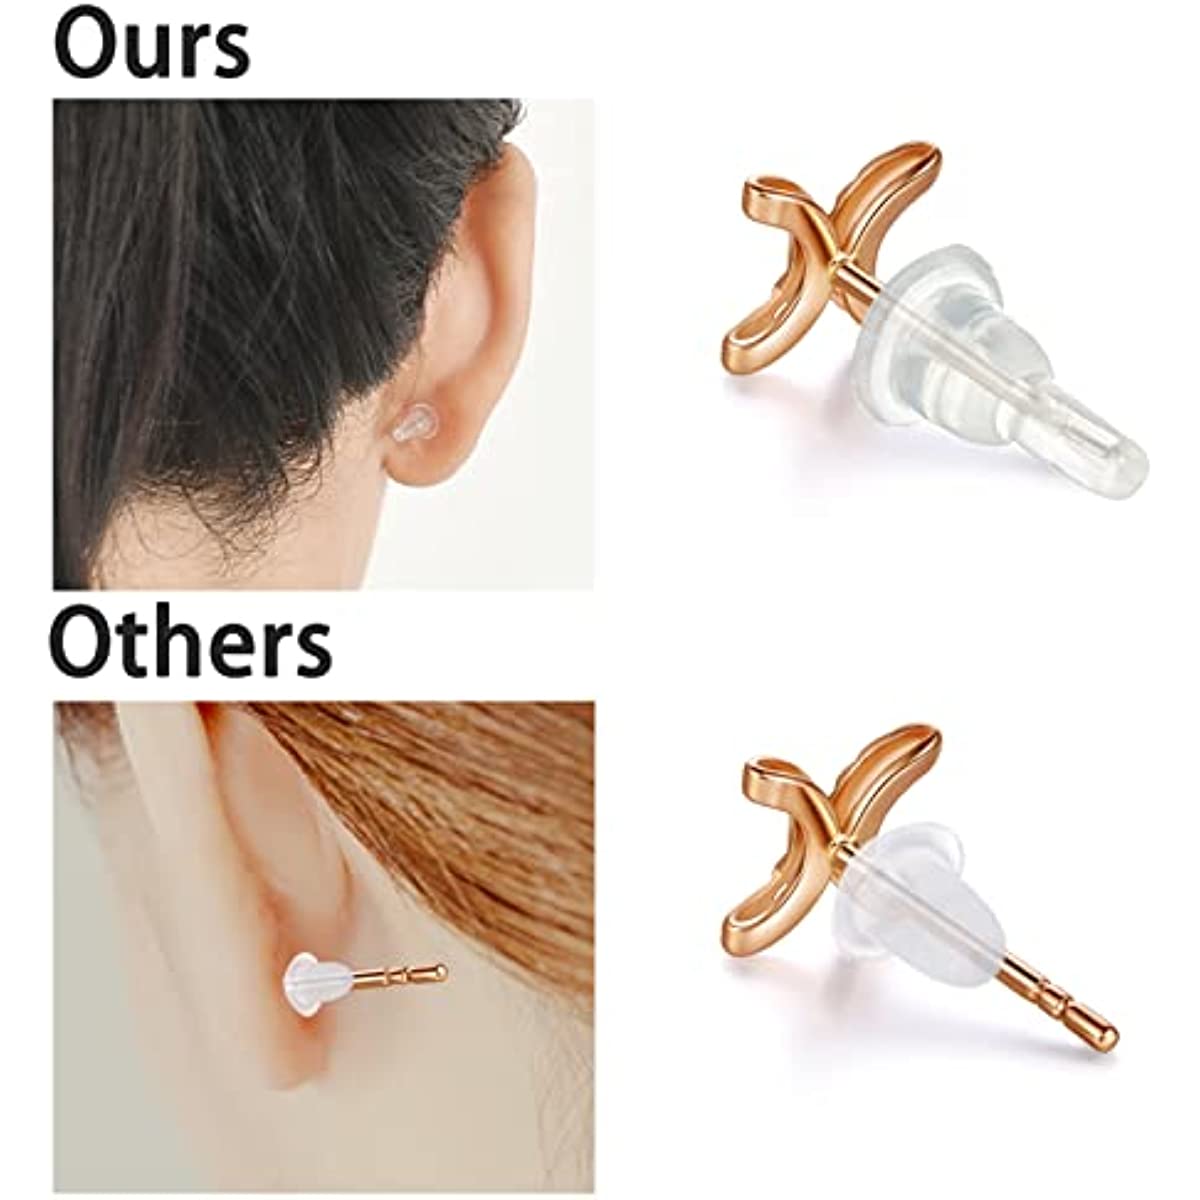  60 PCS Full-Cover Silicone Earring Backs for Studs